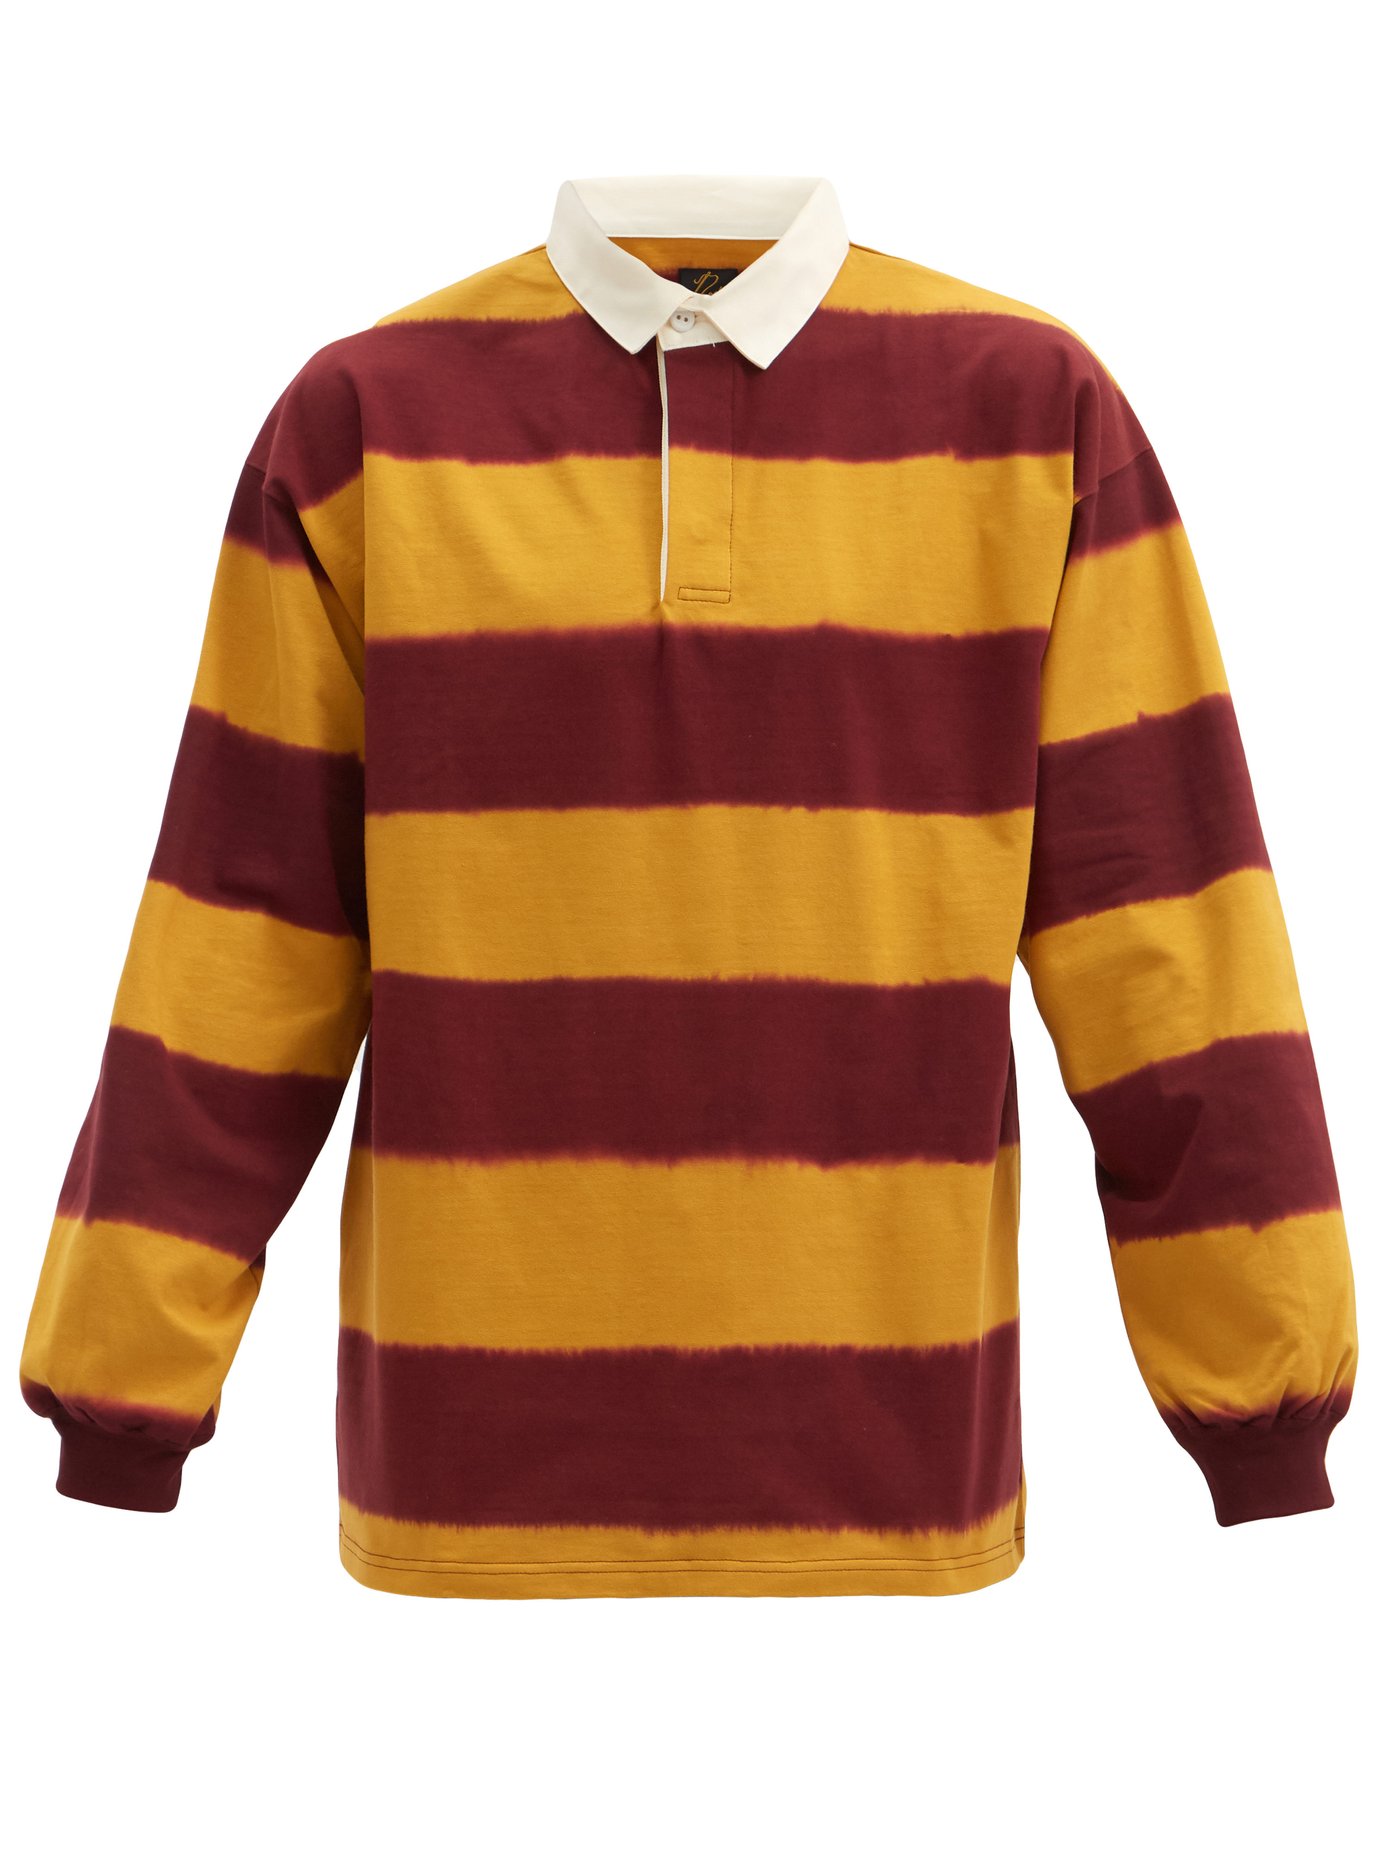 red and yellow striped shirt